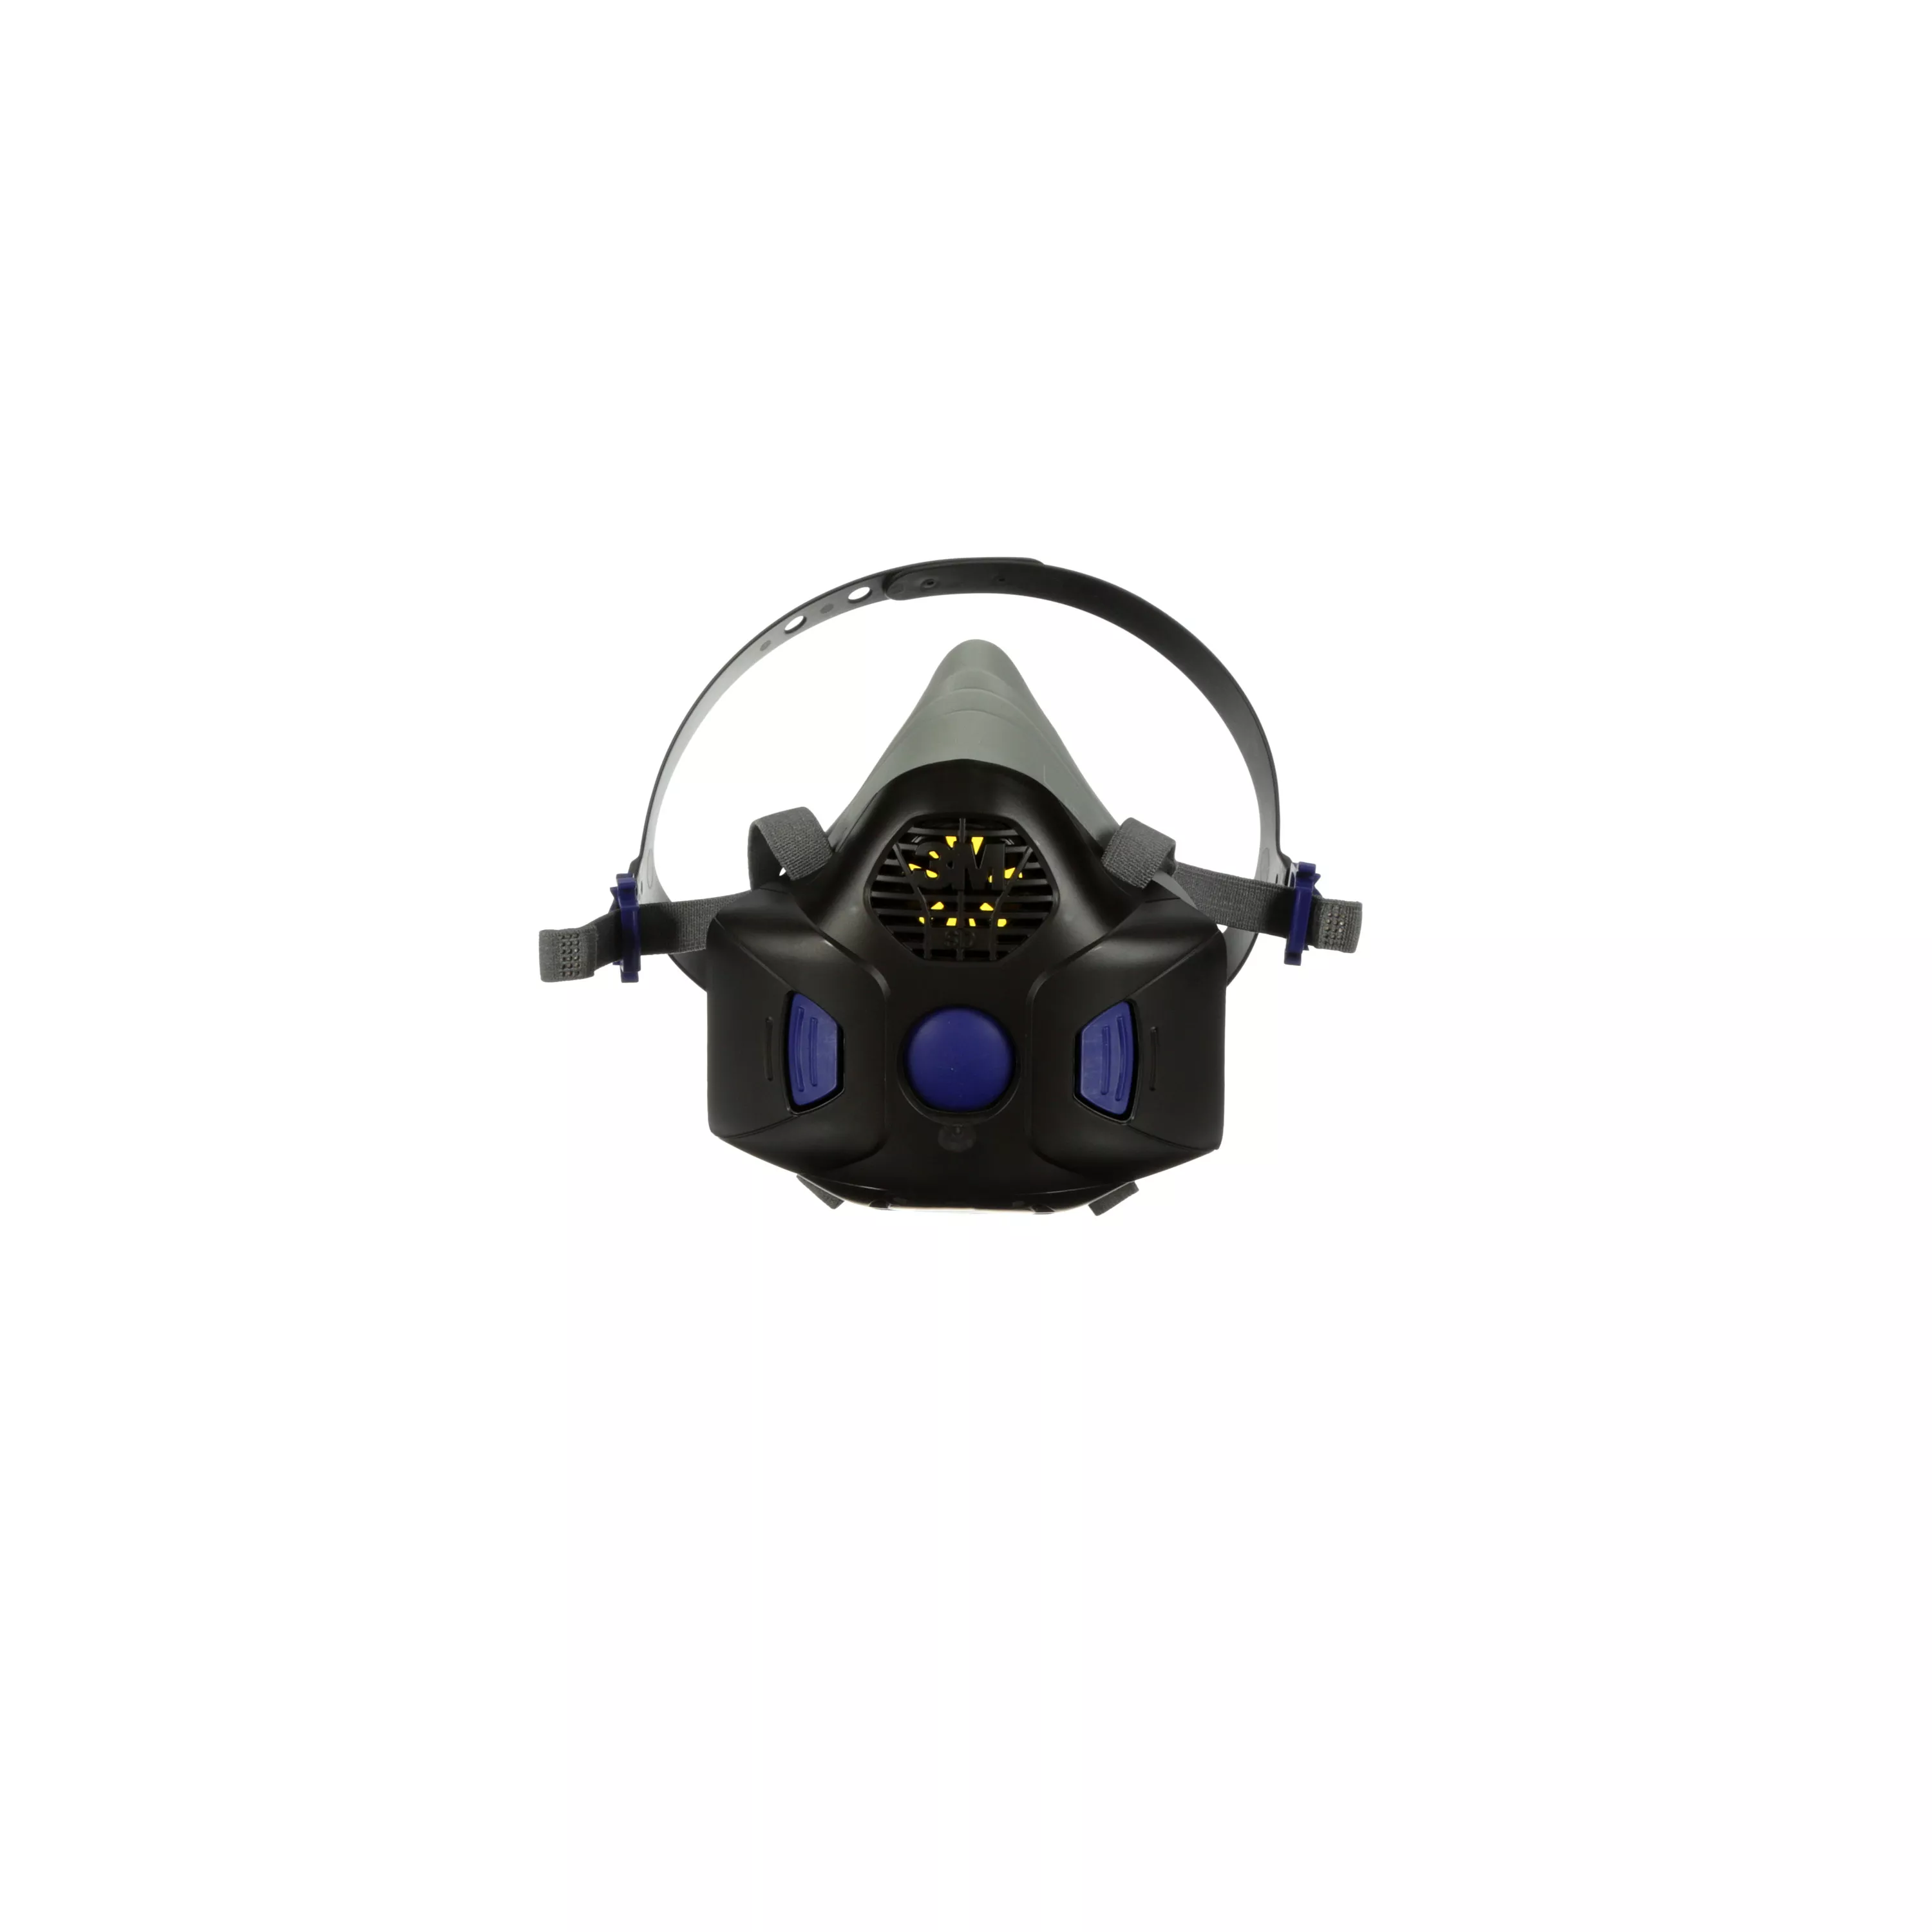 3M™ Secure Click™ Half Facepiece Reusable Respirator with Speaking
Diaphragm HF-803SD, Large, 10 ea/Case